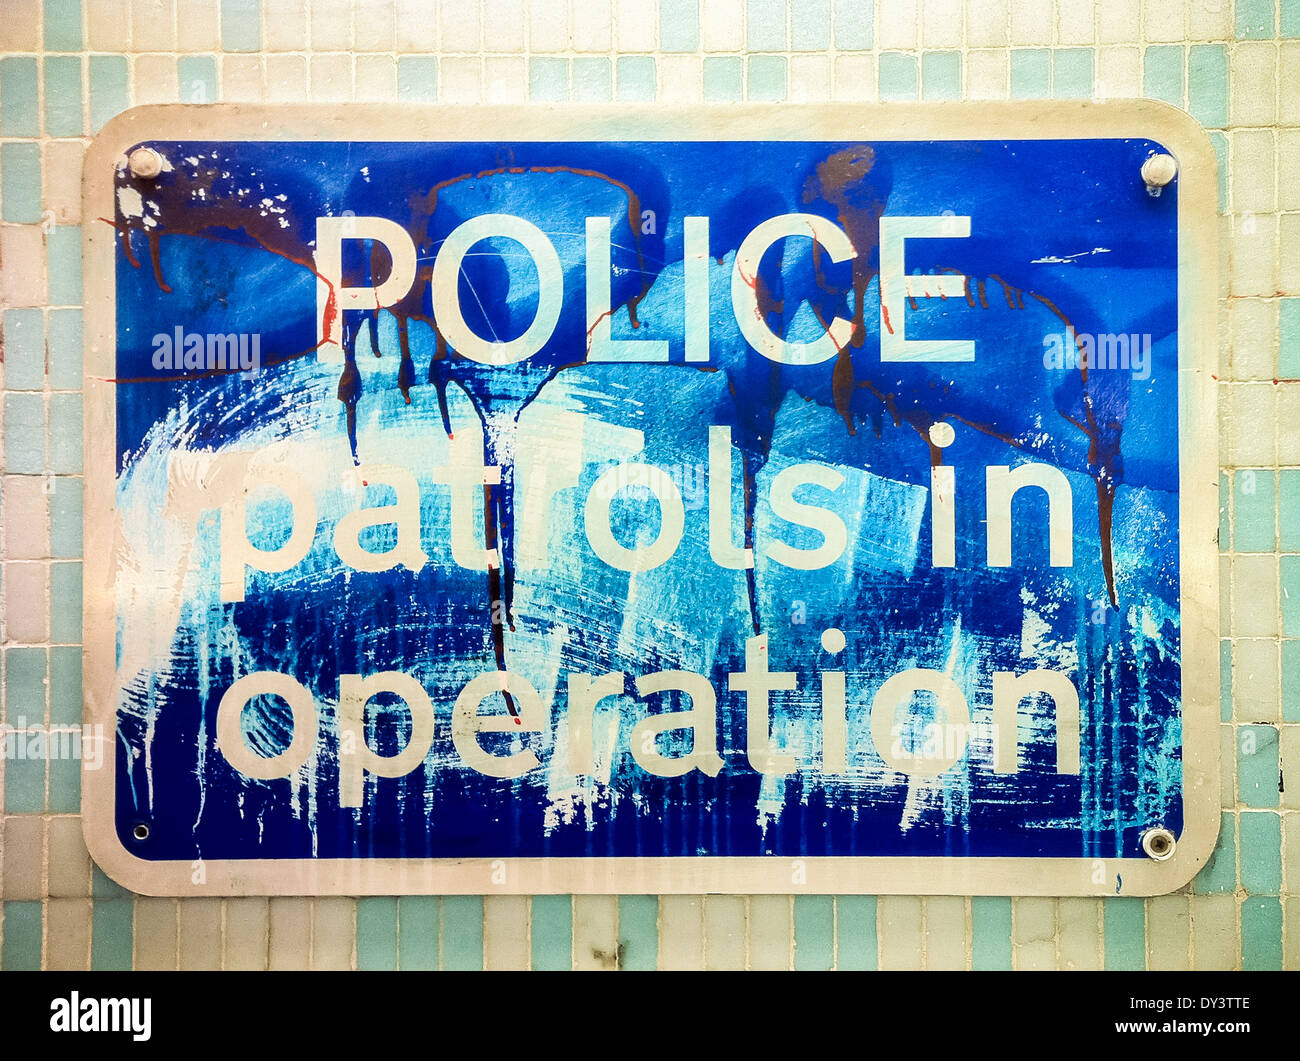 Police patrols in operation sign in london subway Stock Photo